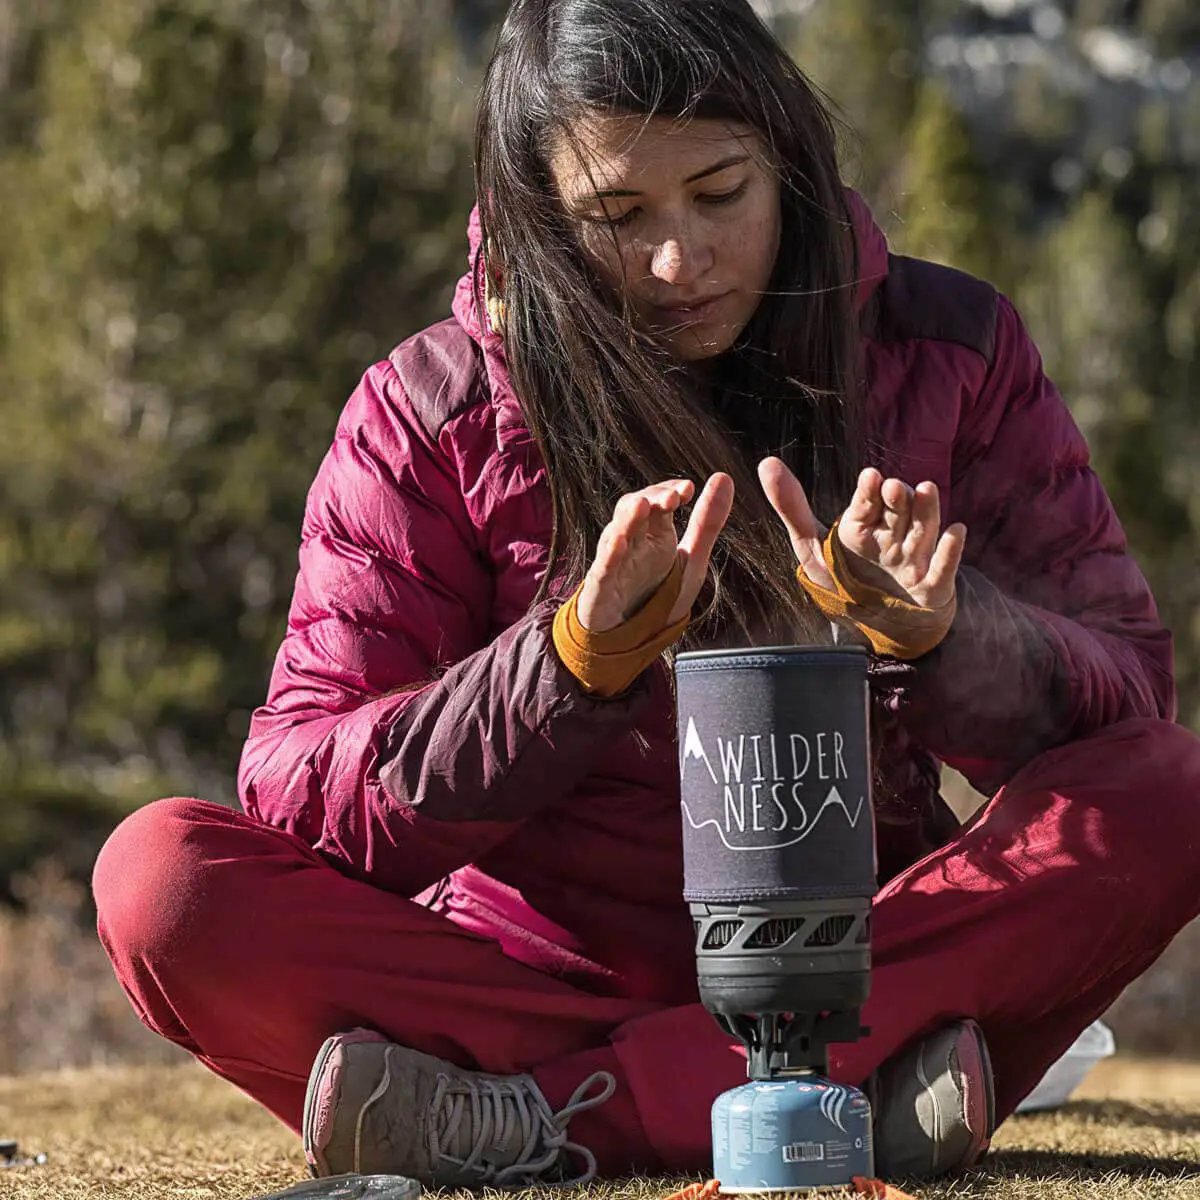 Jetboil Flash Wilderness 1L Personal Cooking Stove - John Bull Clothing